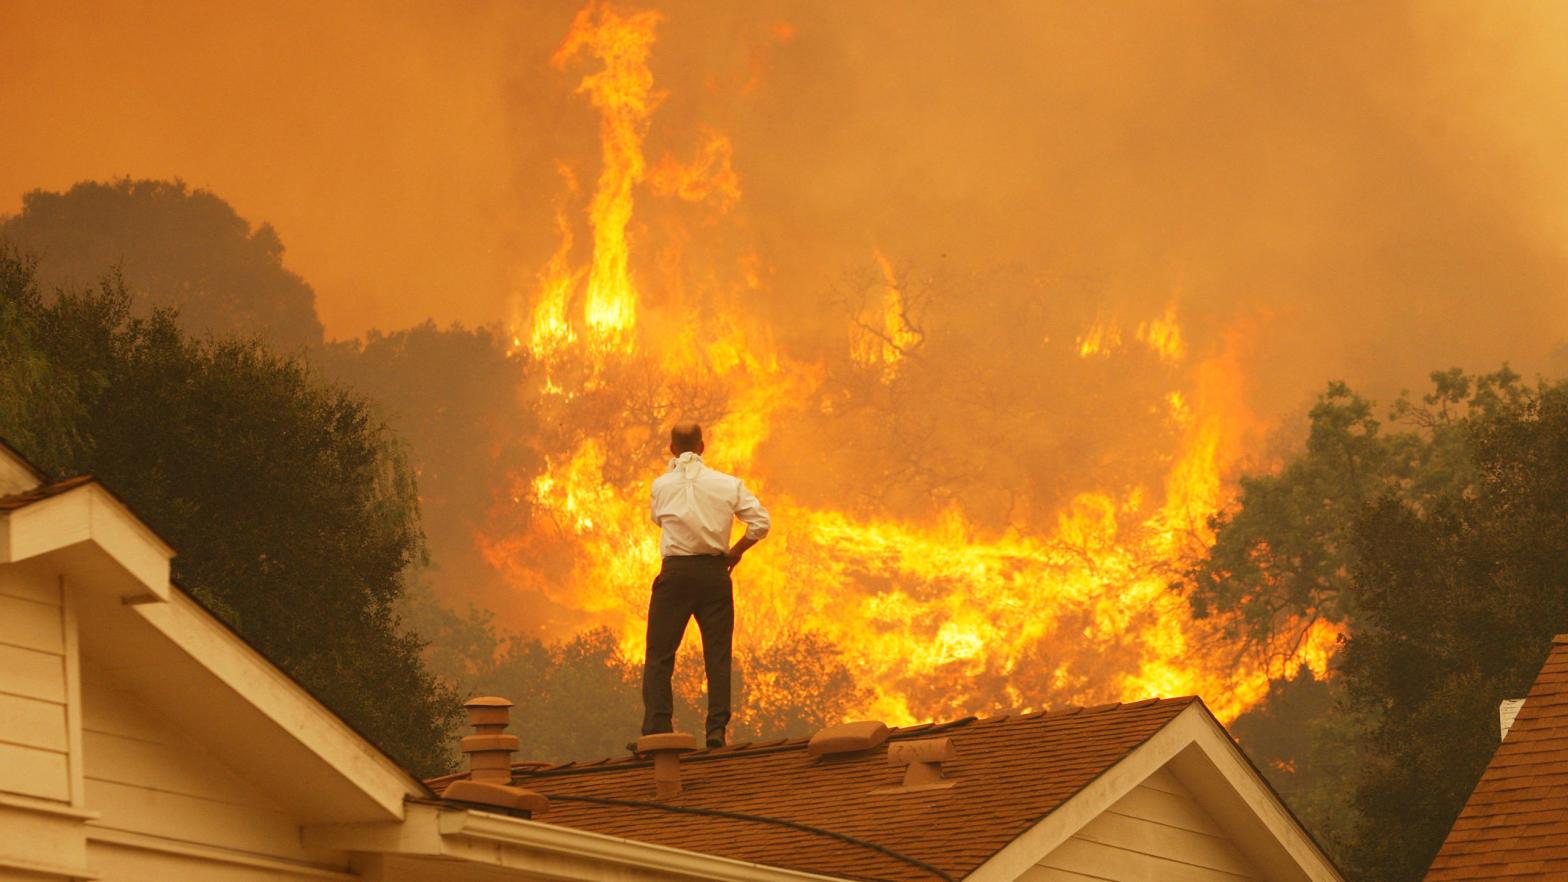 A man on a rooftop looks at approaching flames from the Springs fire in May 2013 near Camarillo, California.  (Photo: David McNew, Getty Images)